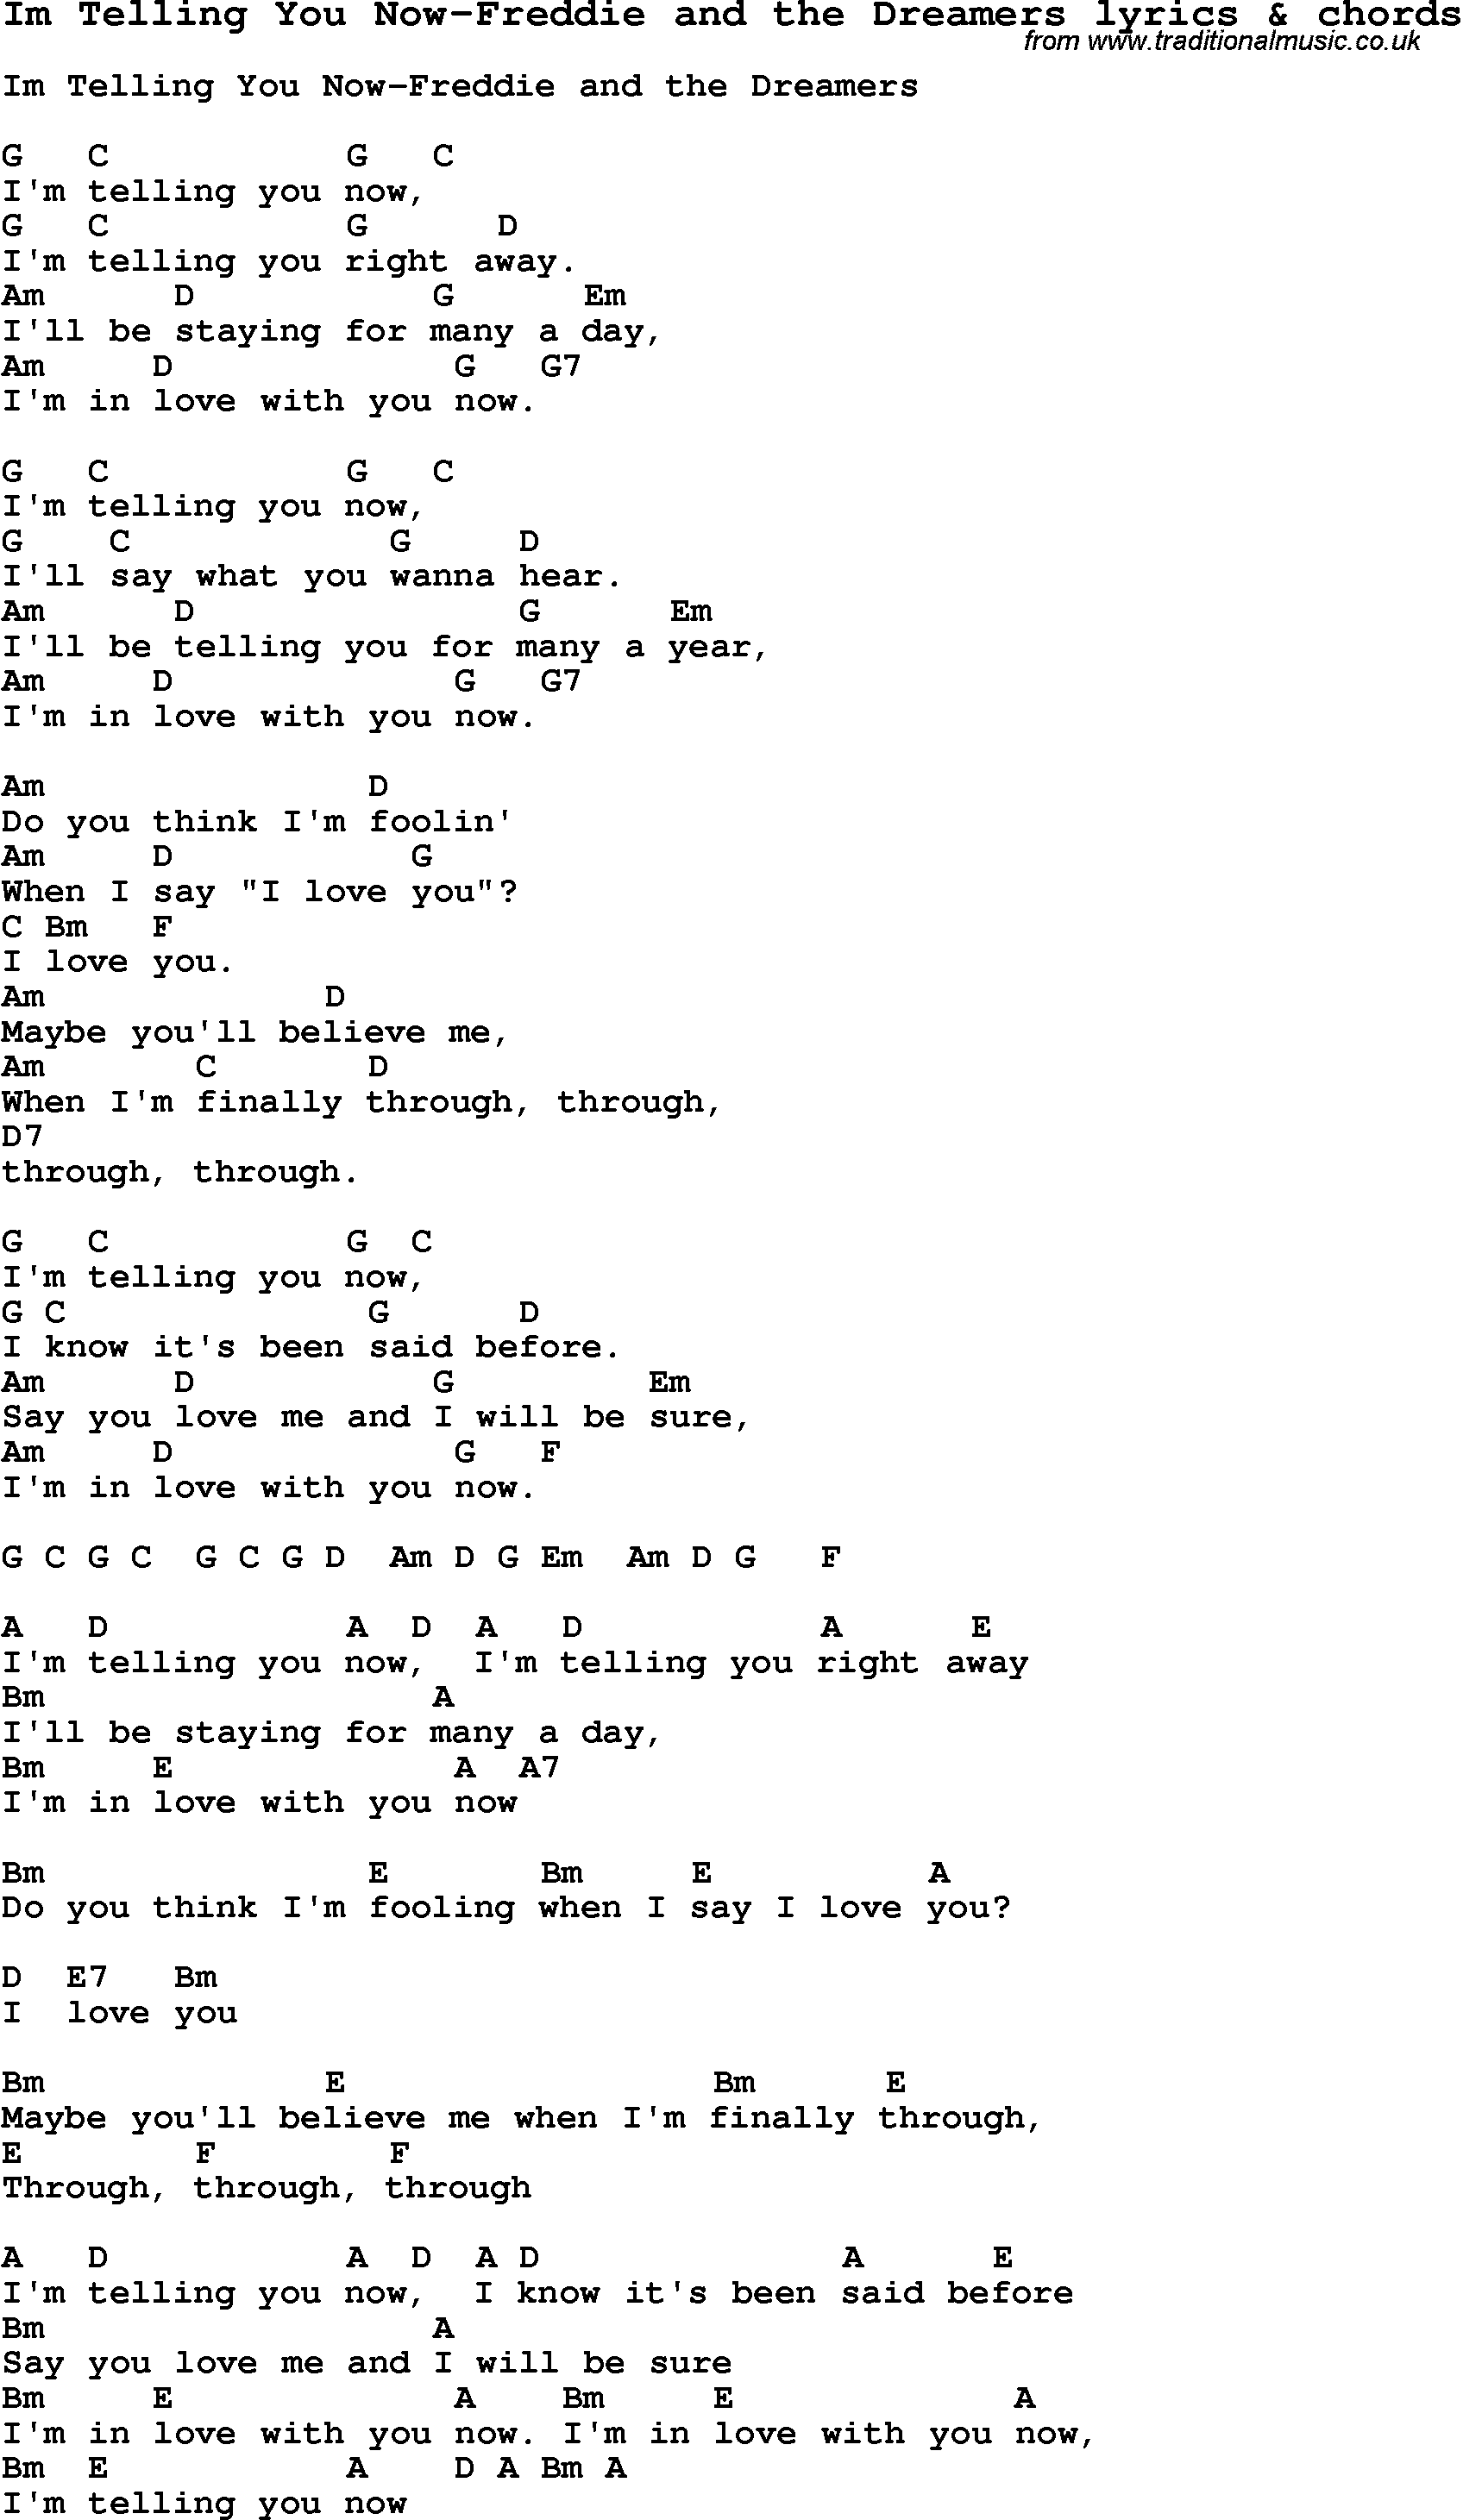 Love Song Lyrics for: Im Telling You Now-Freddie and the Dreamers with chords for Ukulele, Guitar Banjo etc.